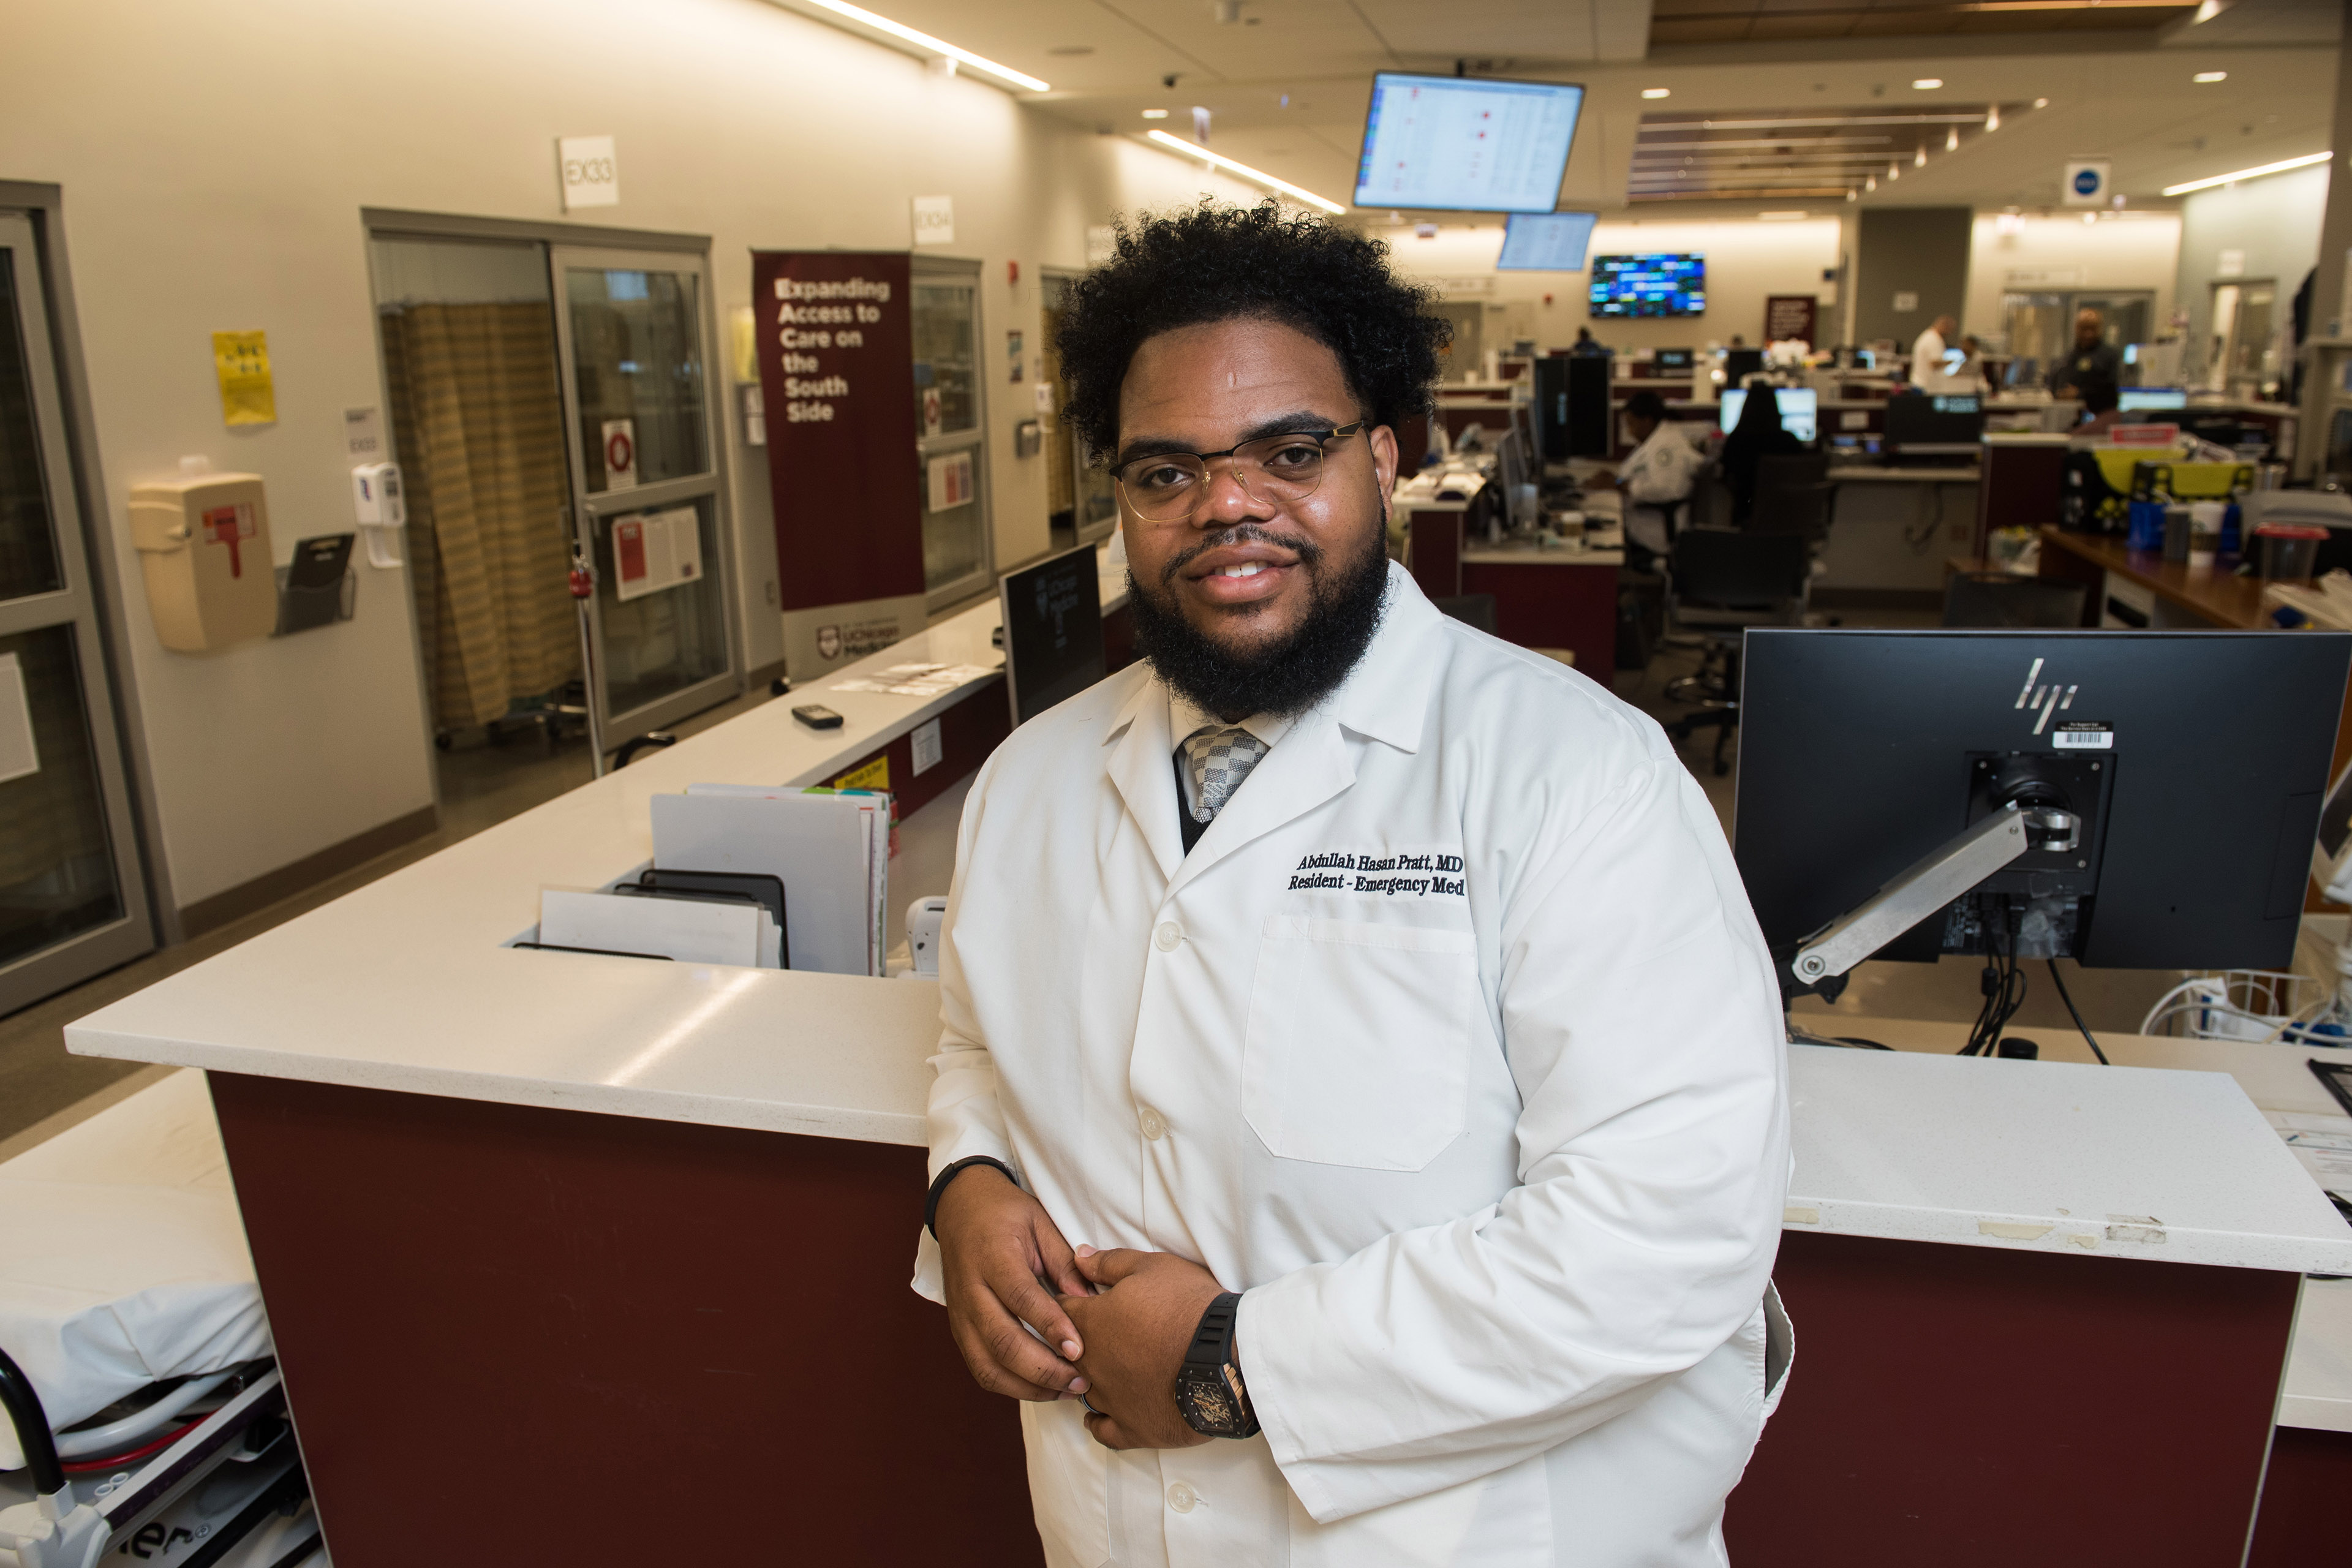 Dr. Abdullah Pratt stands at a reception desk in a medical building. He wears a white doctor's coat and gently smiles at the camera.